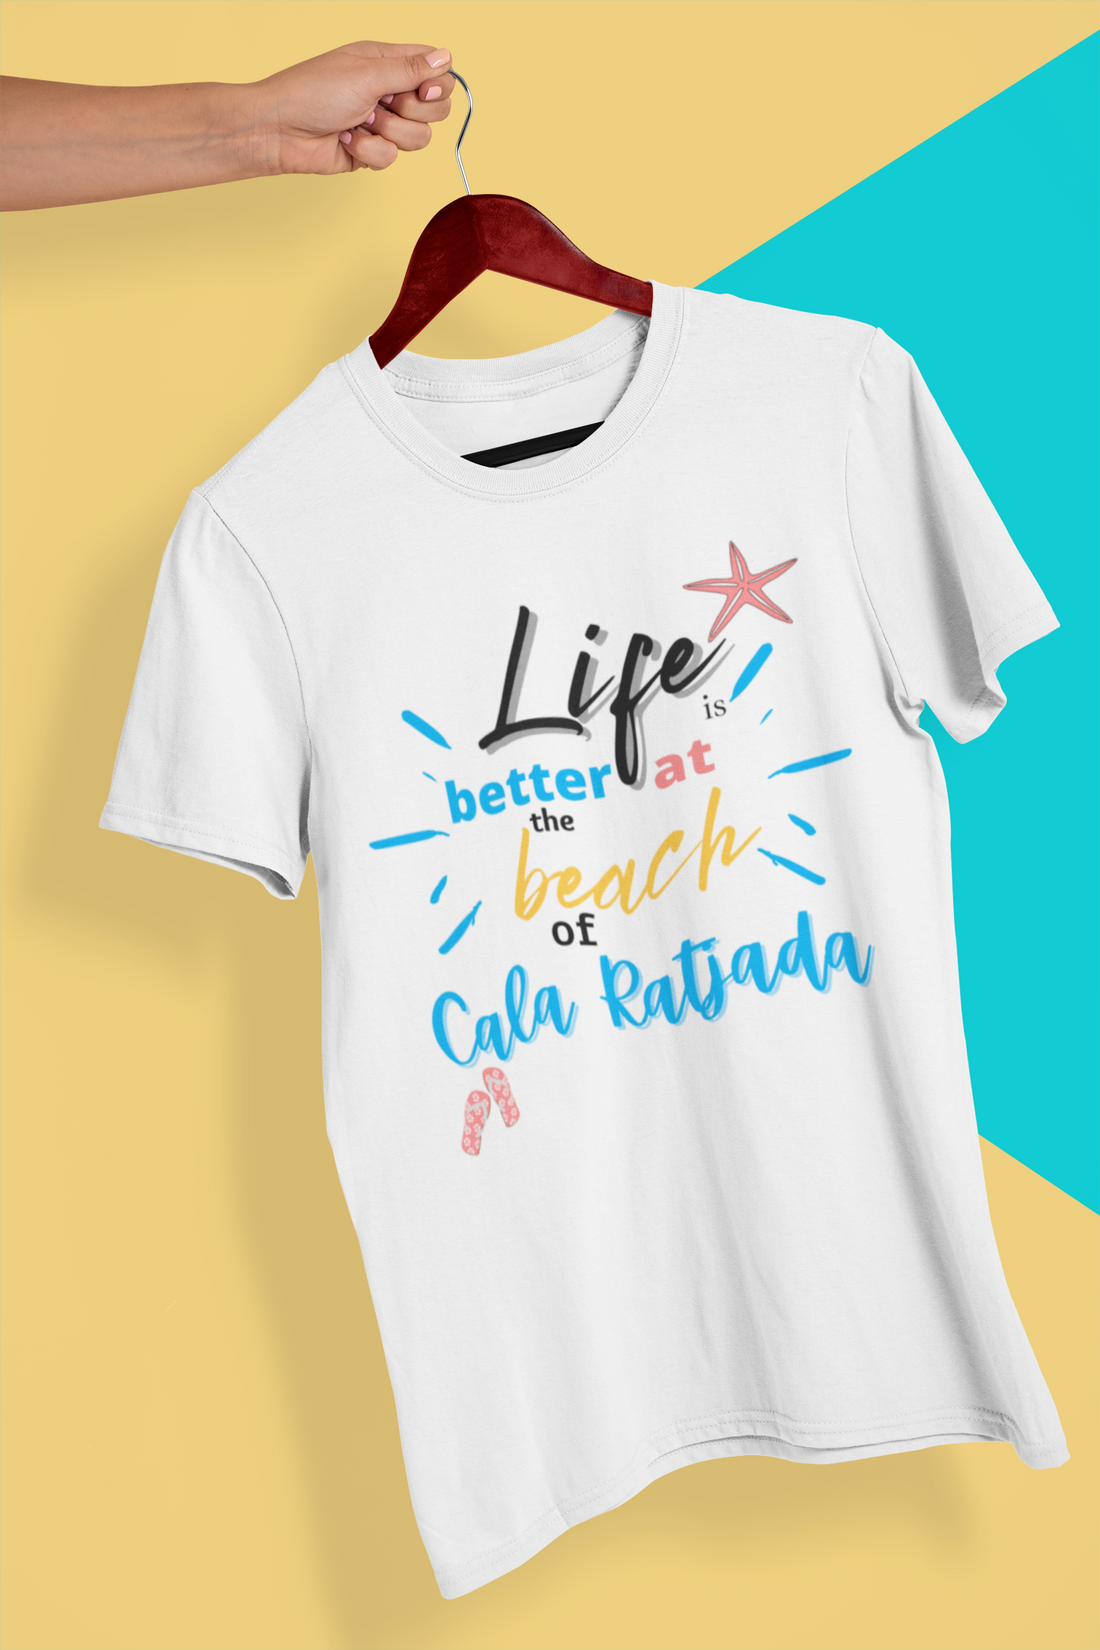 weißes Shirt mit Druck "Life is better at the beach of Cala Ratjada